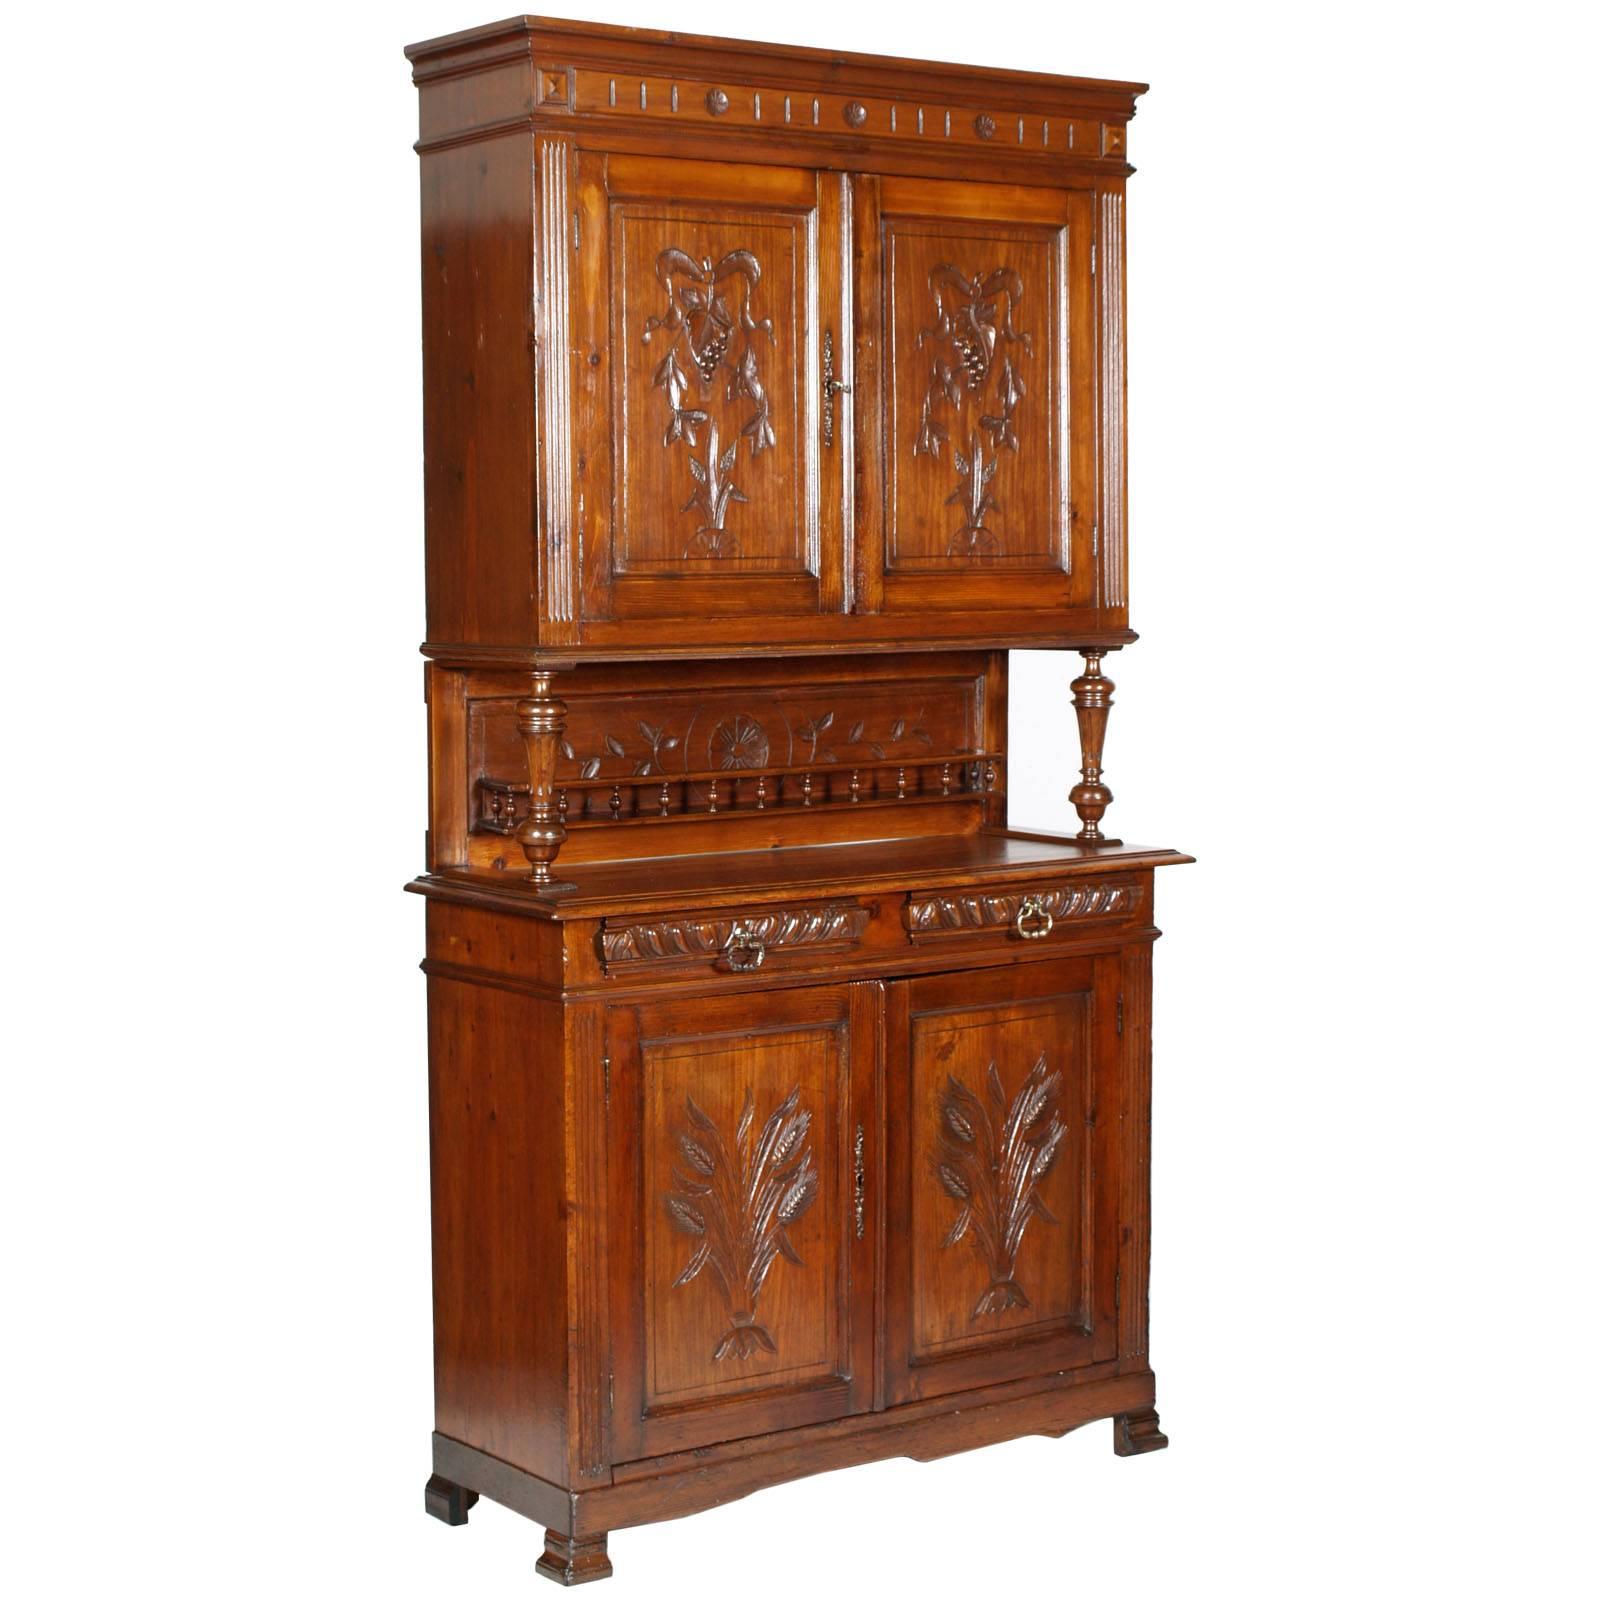 Art Nouveau Provencal Hand-Carved Solid Wood Sideboard Restored and Wax Polished For Sale